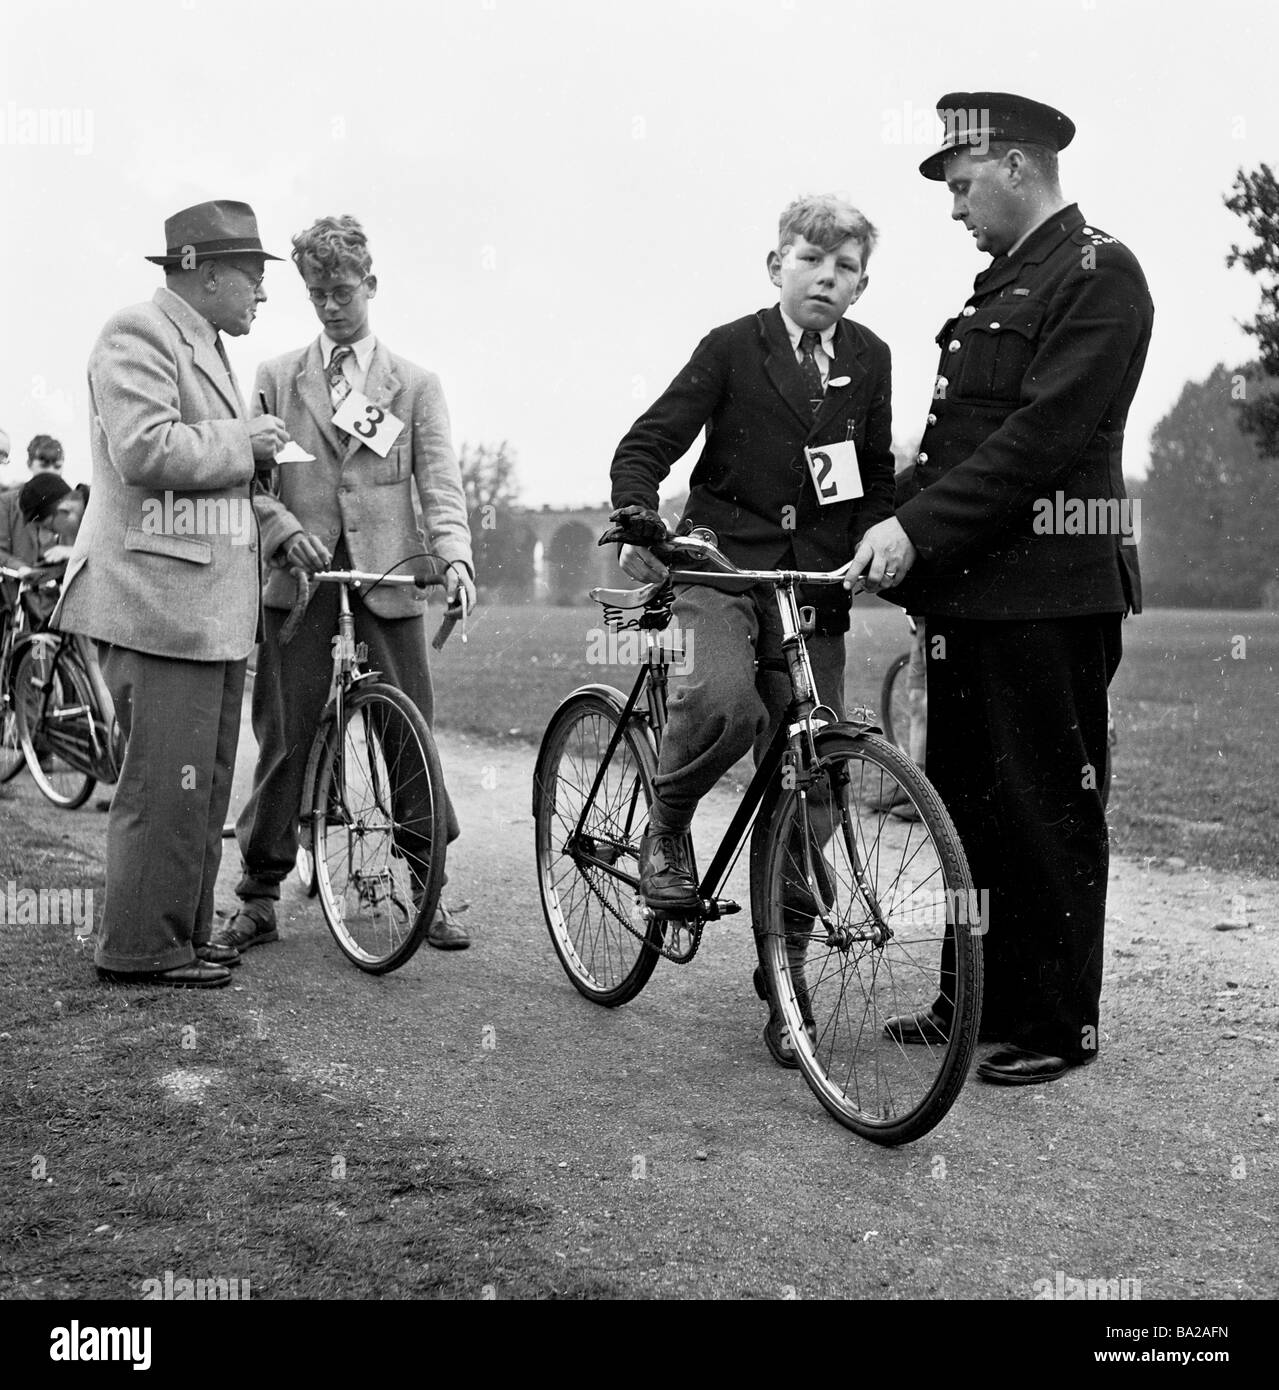 1950s, historical, outside on a path an official checks names as a policeman starts schoolboys off on their cycling proficiency test, London, England. Stock Photo